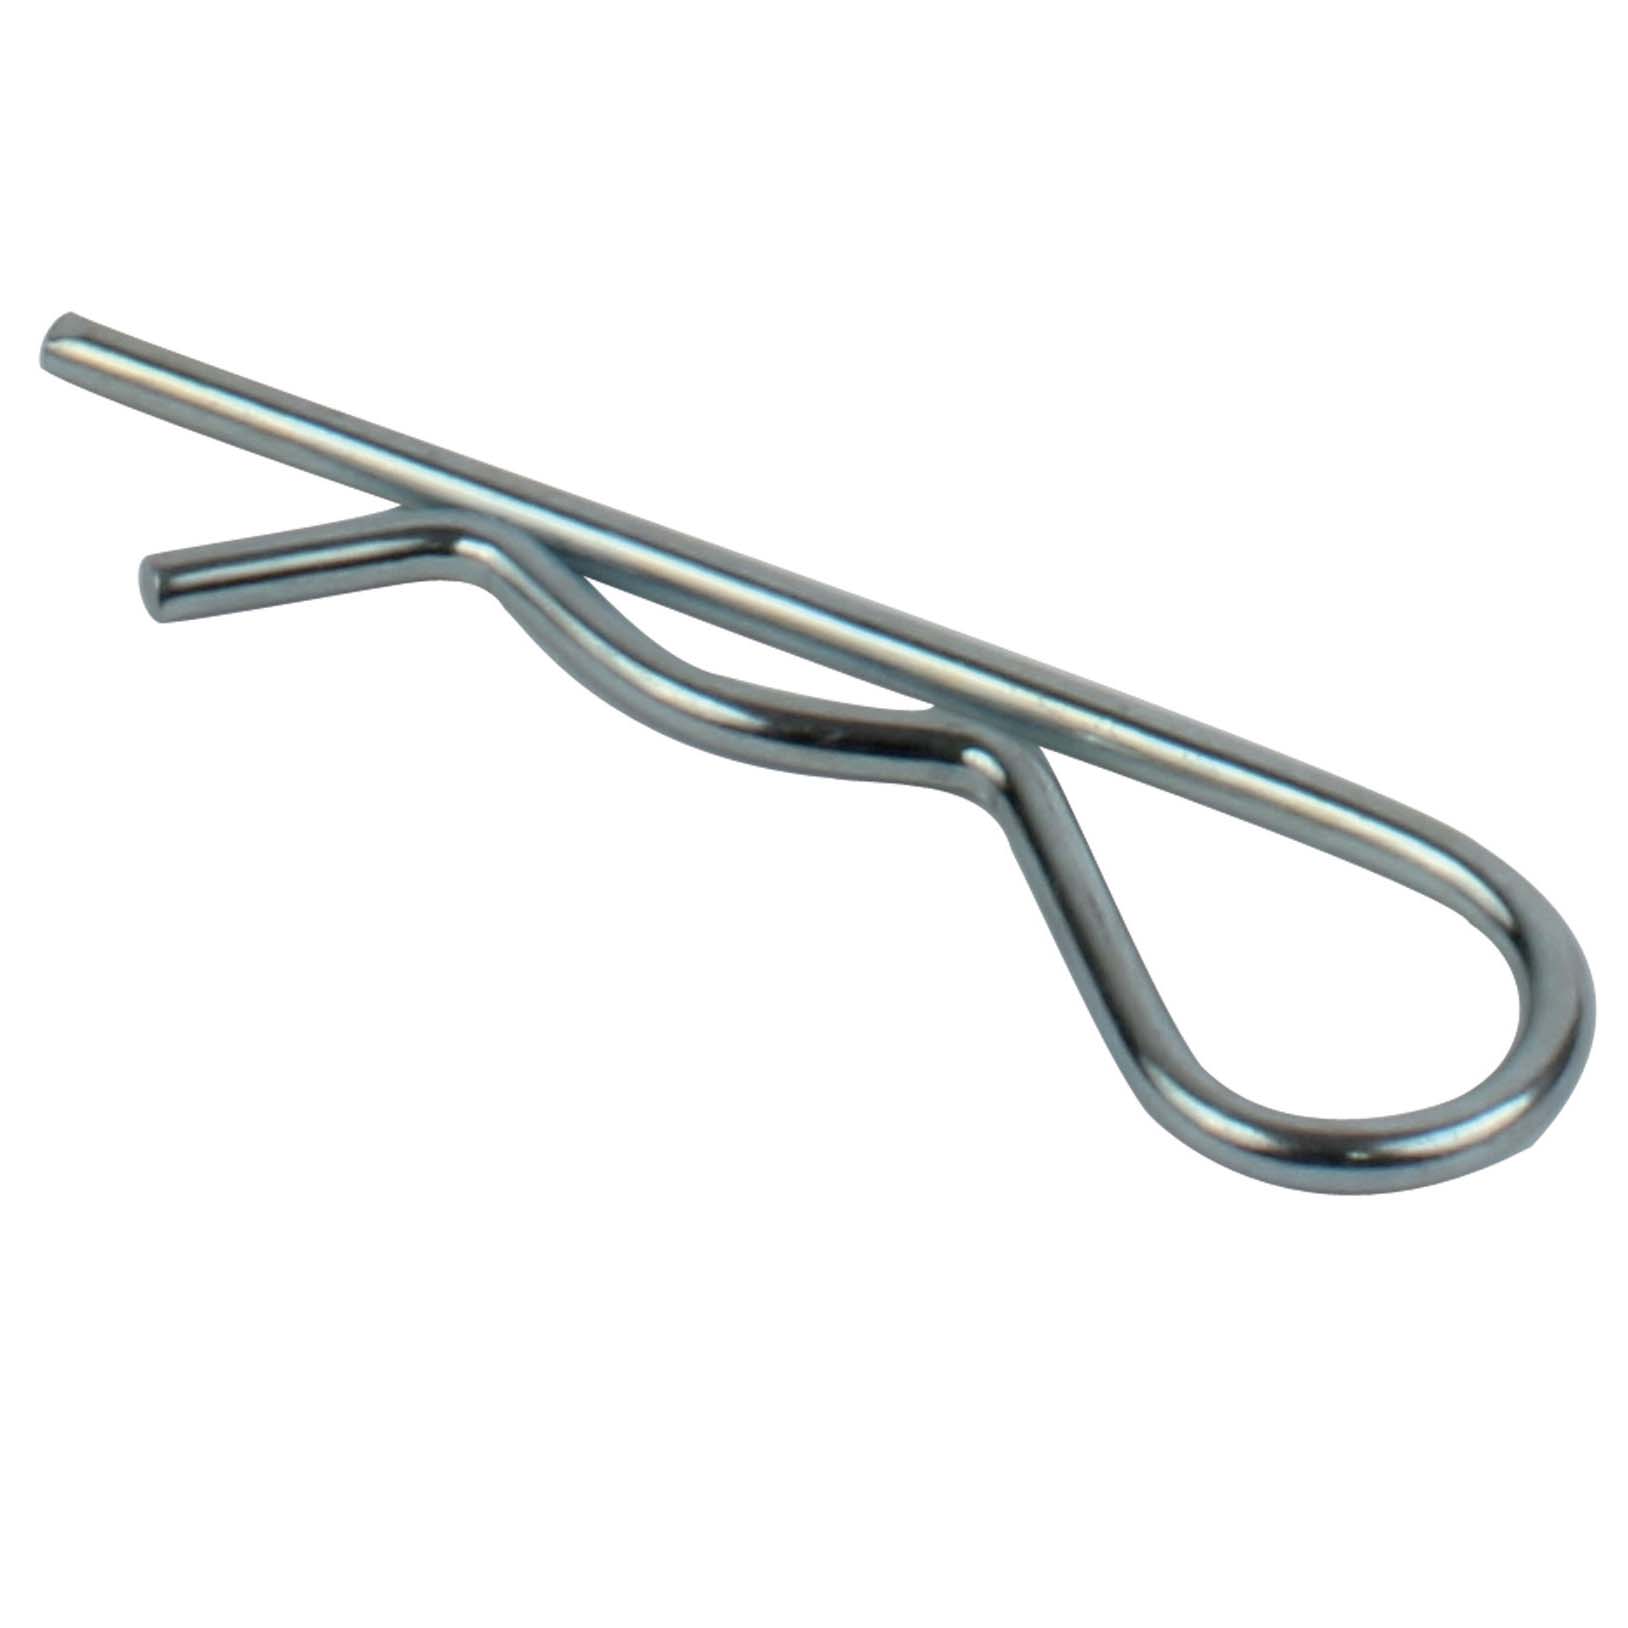 Hitch pin - Hitch - Stainless steel AISI 304 - 